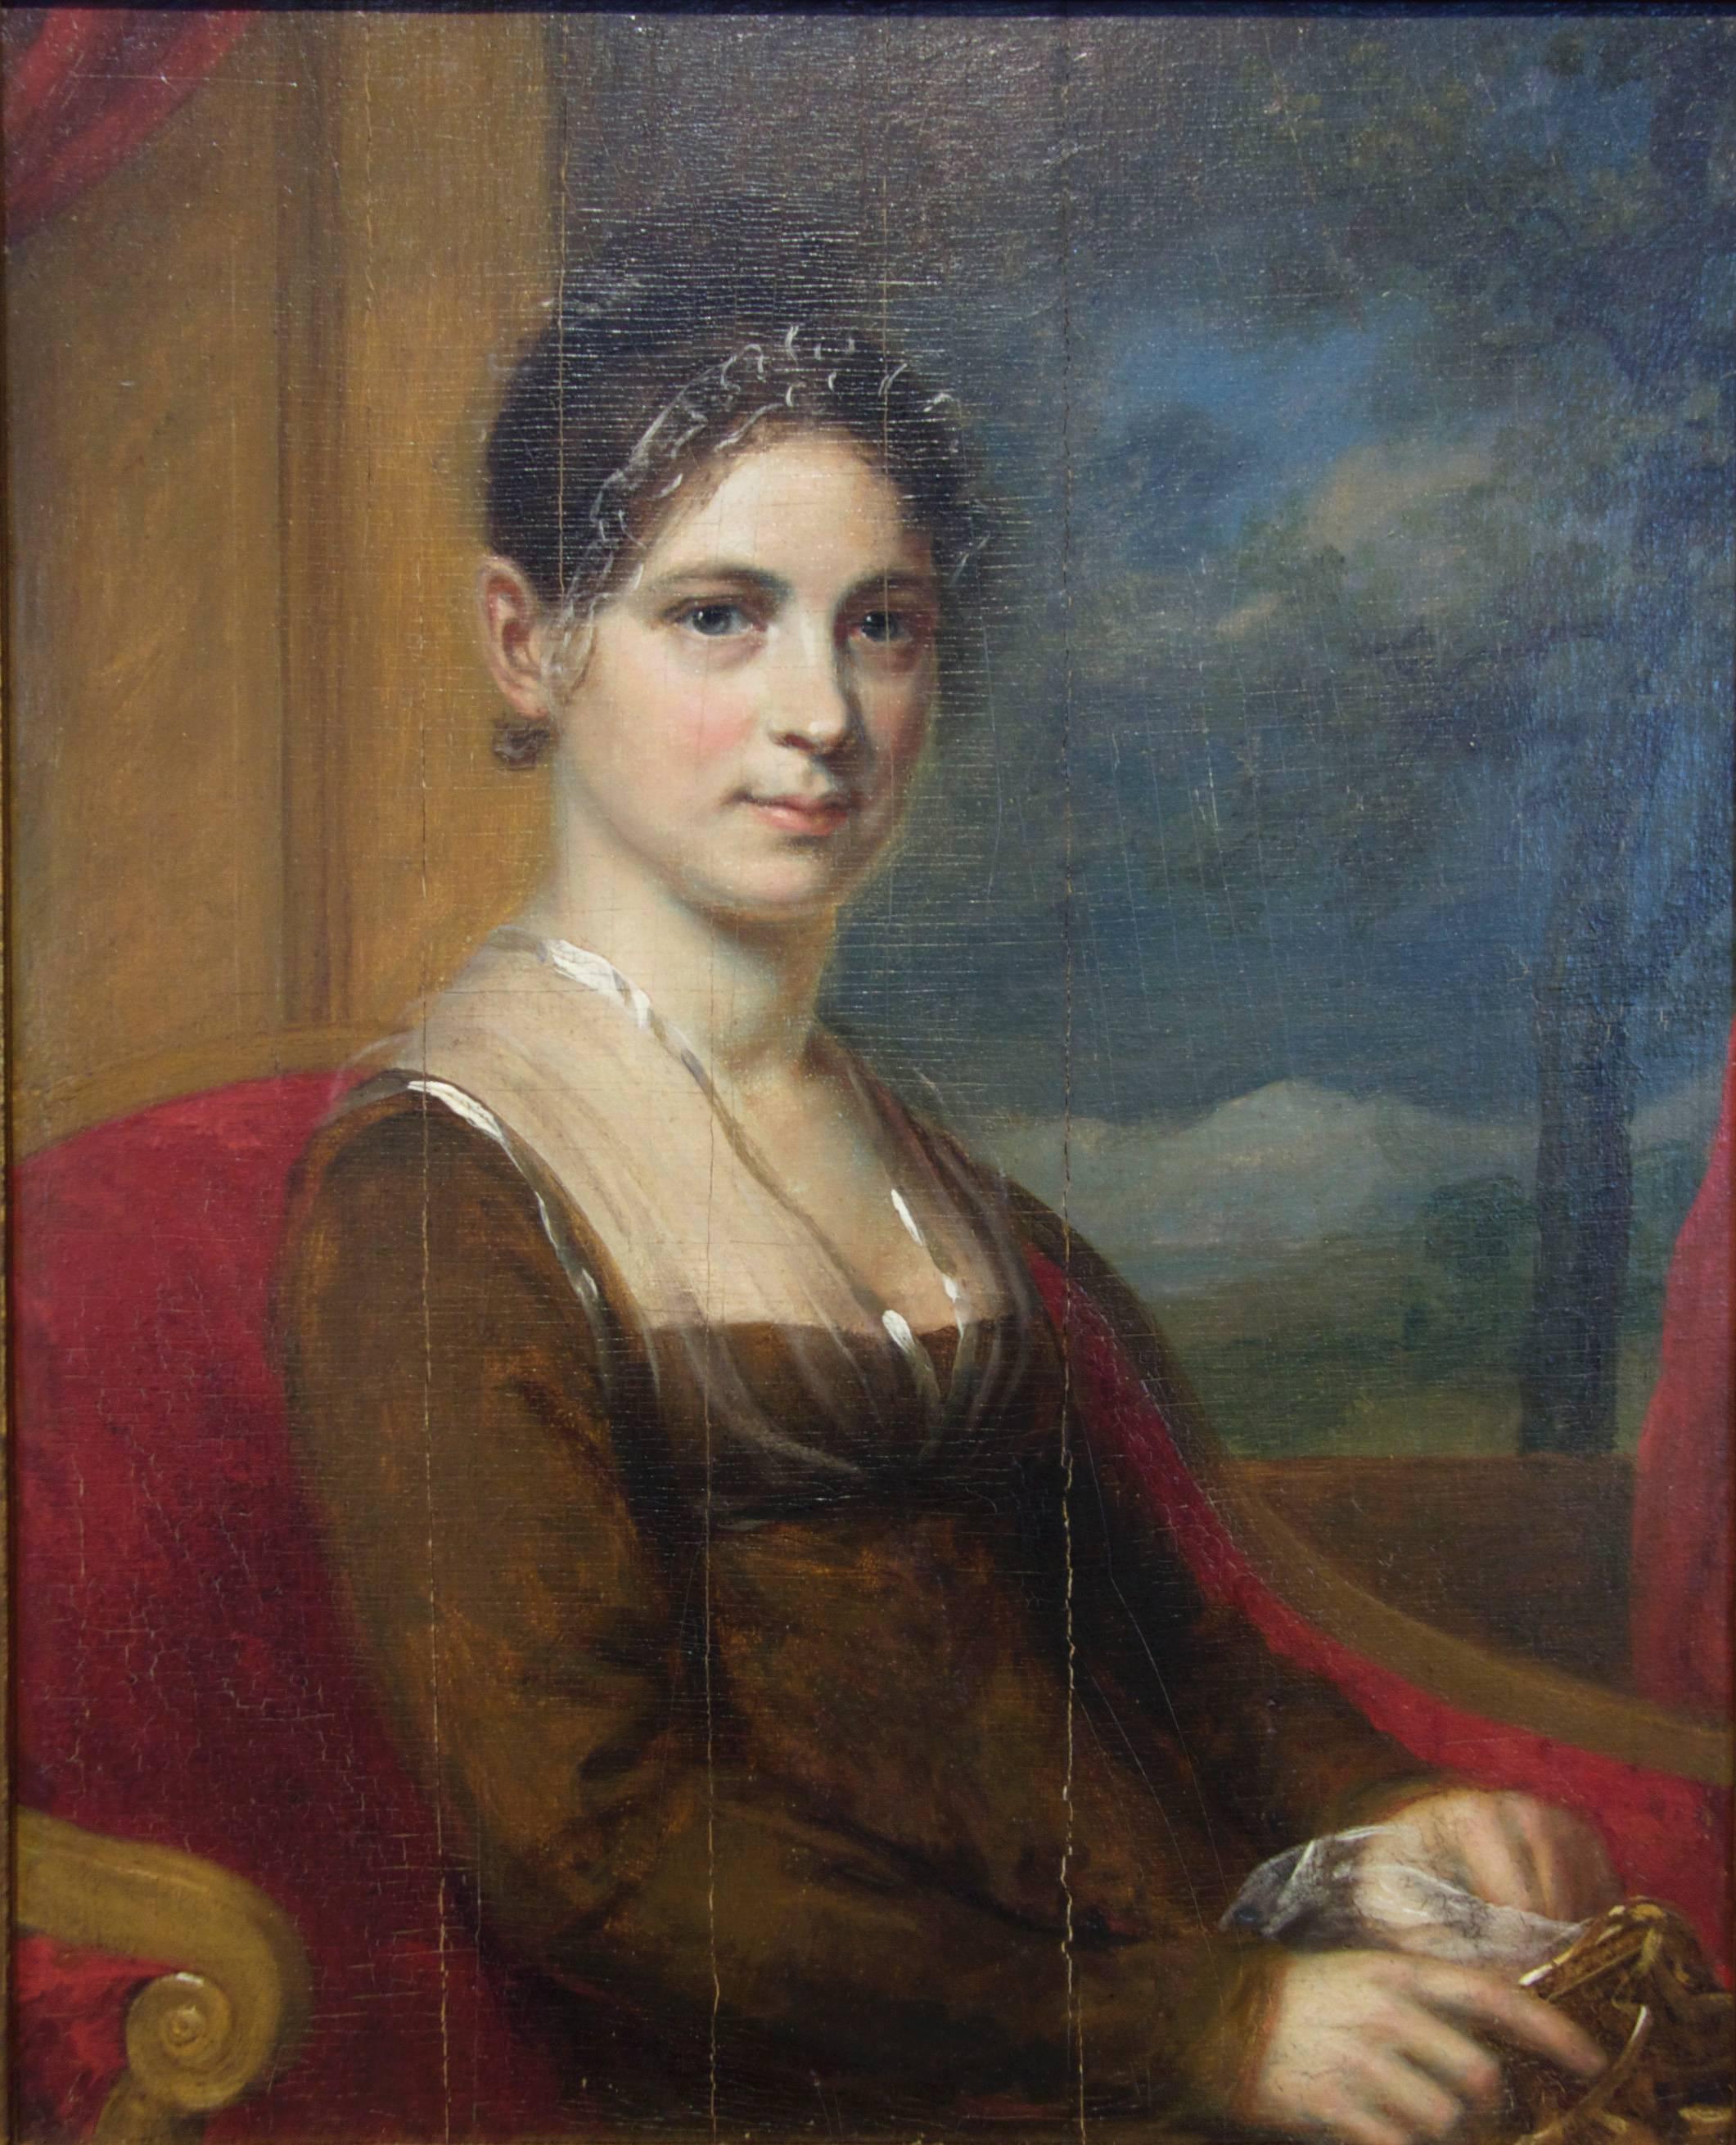 Tacy Shoemaker (neé Nixon) (1780-1872) was born in Milford, Bucks County, Pennsylvania. She is the subject of at least two portraits this and another painted about 15 years later, which is in the American Art collection of the Huntington Library in